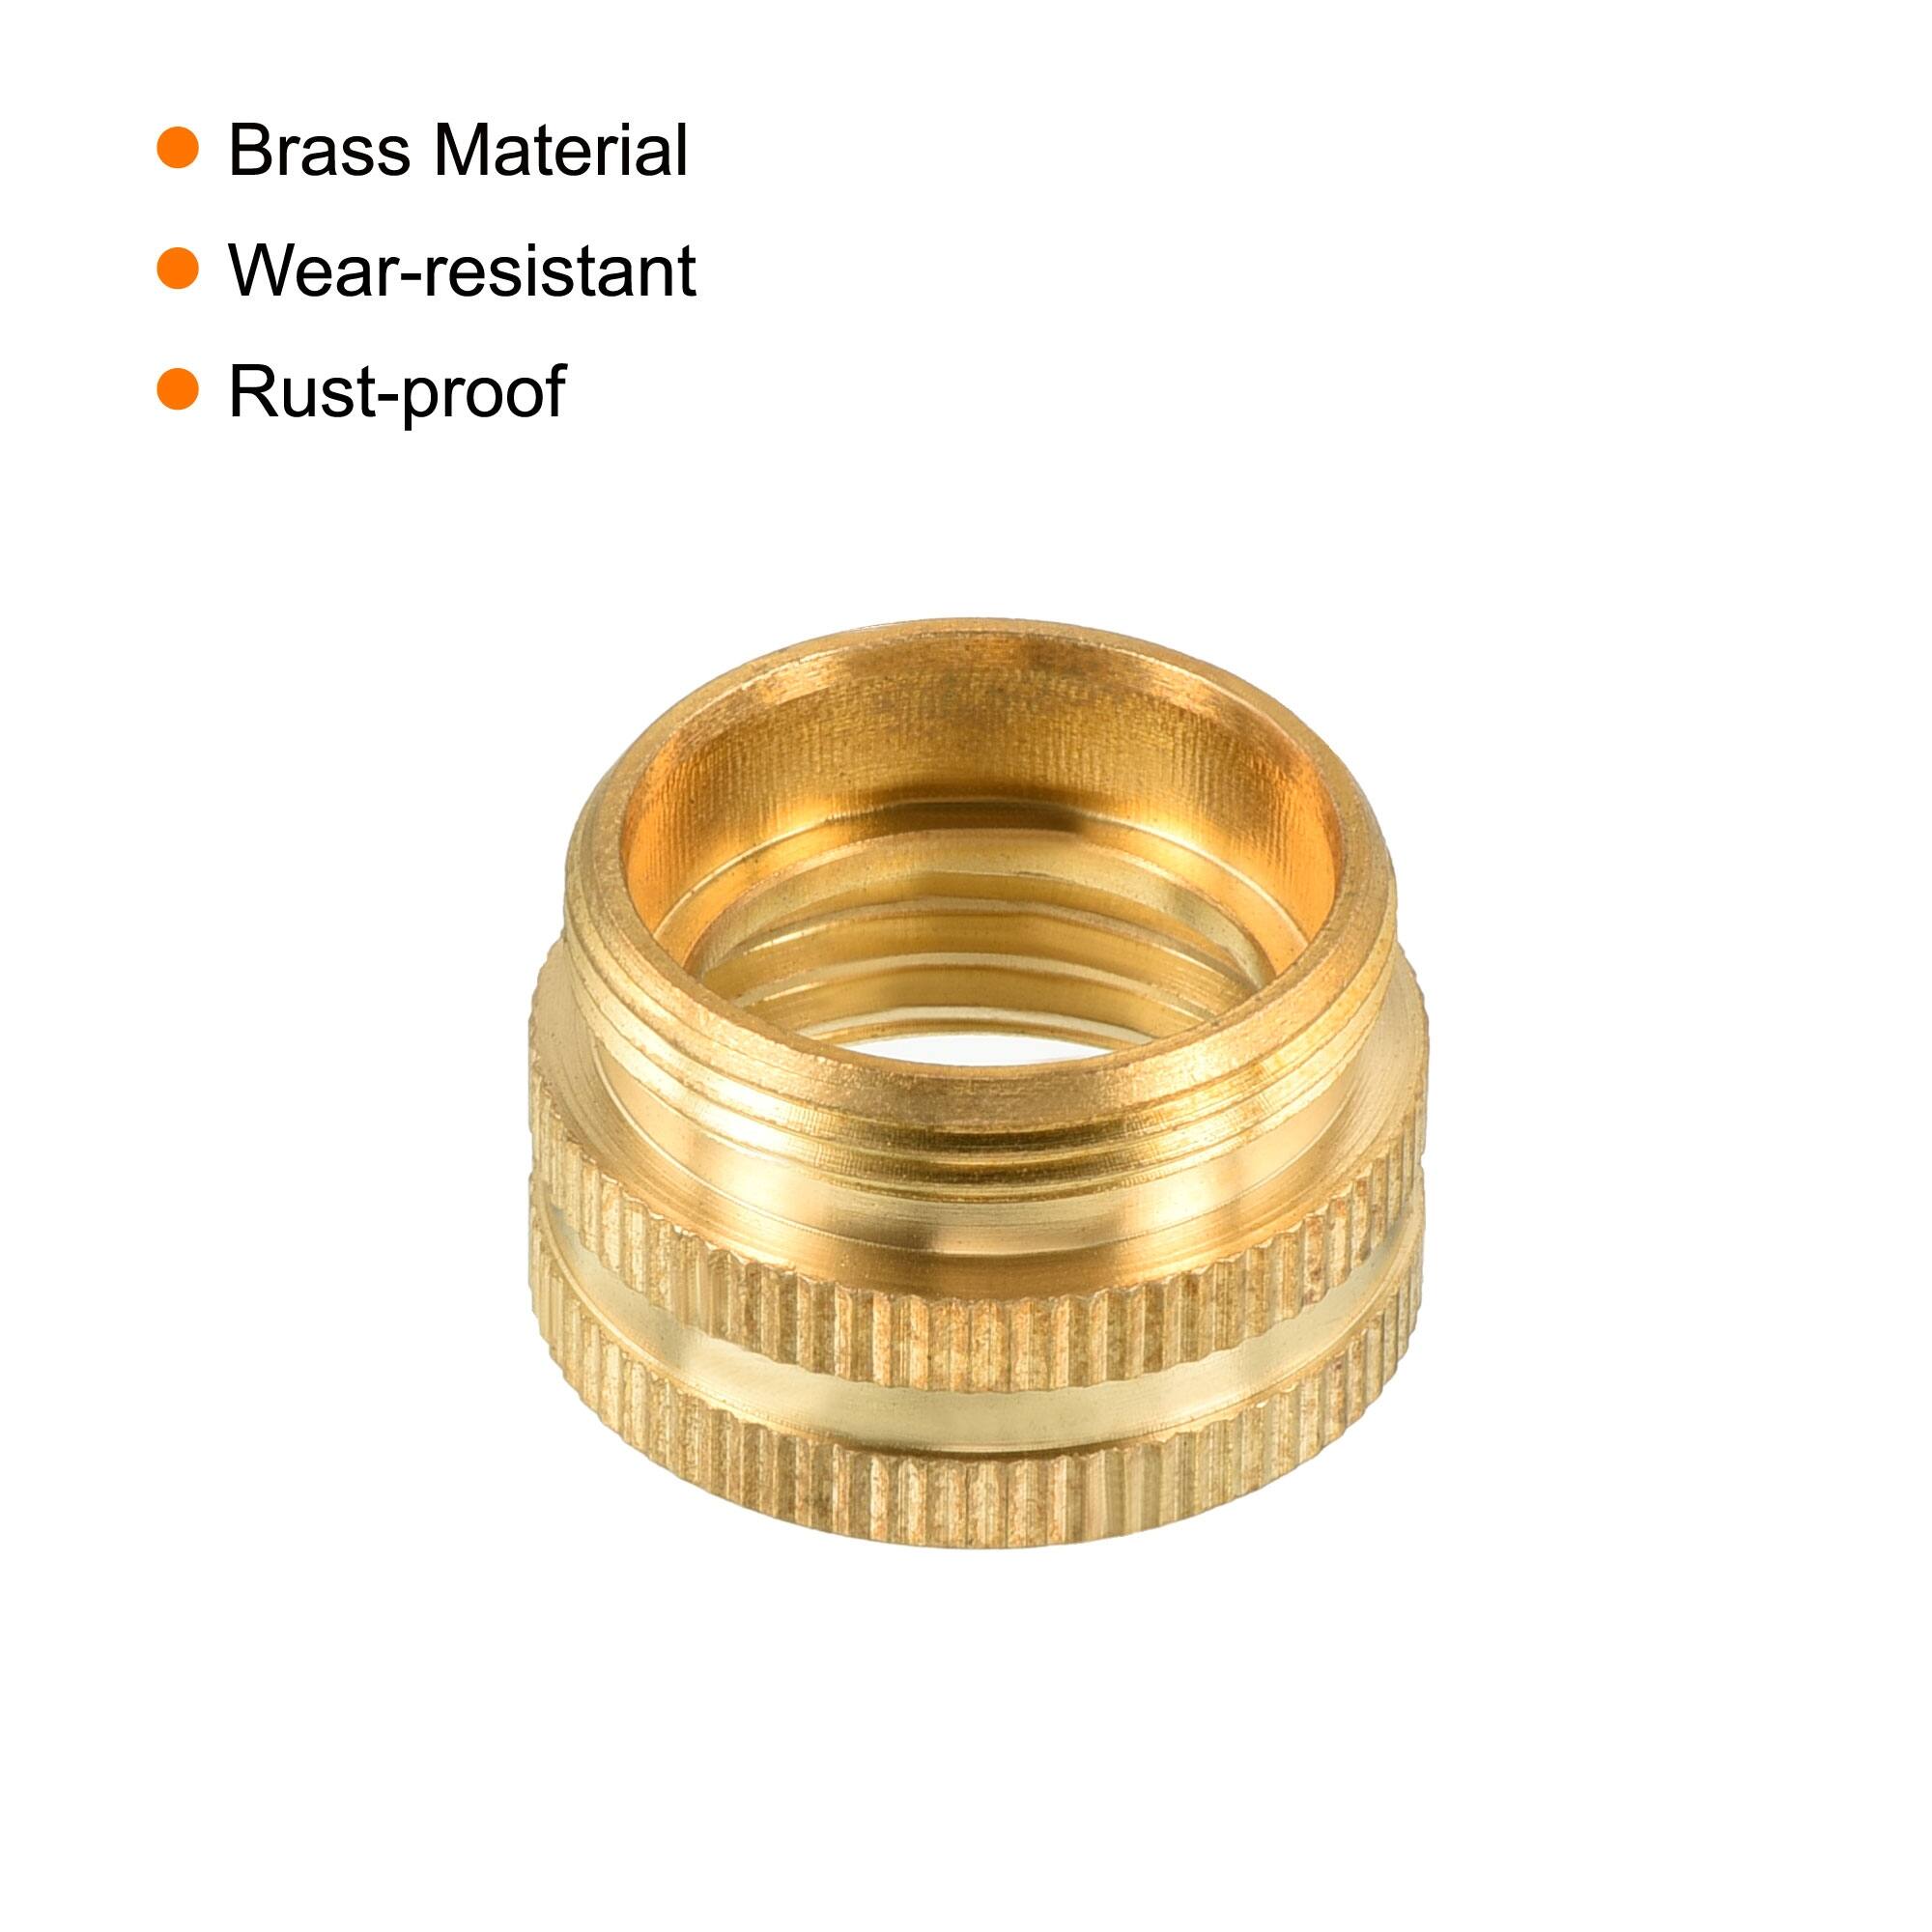 Male to Female Thread Faucet Adapter, Brass Aerator Connector Fitting for Garden Hose Water Filter - Gold